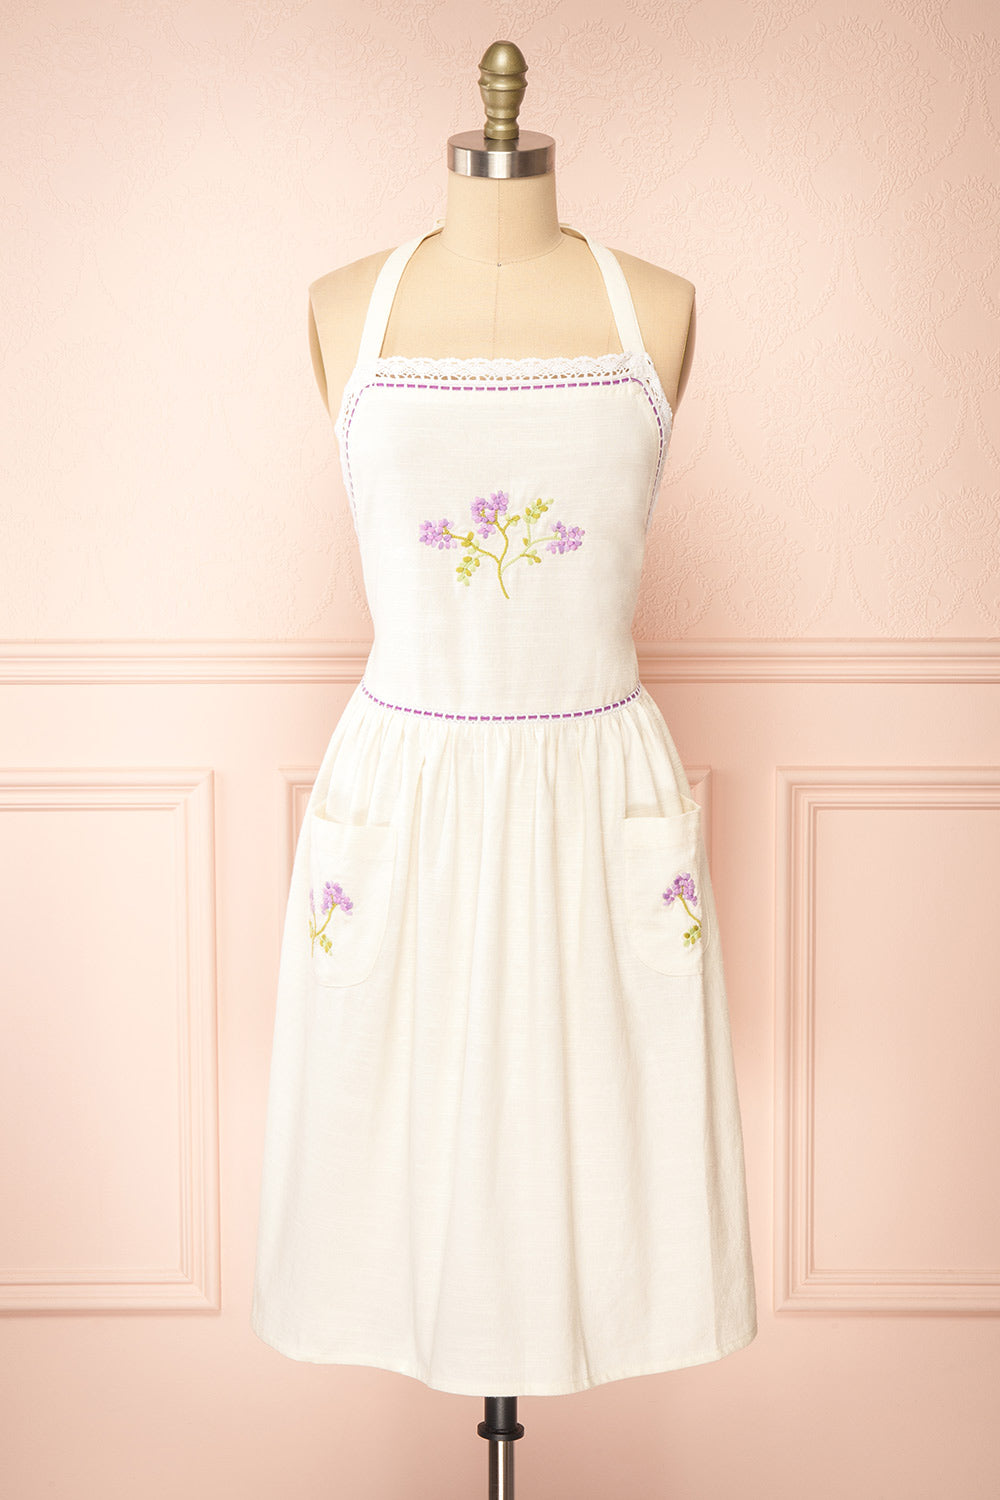 Cornwall White Apron with Embroidered Lavender | Boutique 1861 front view